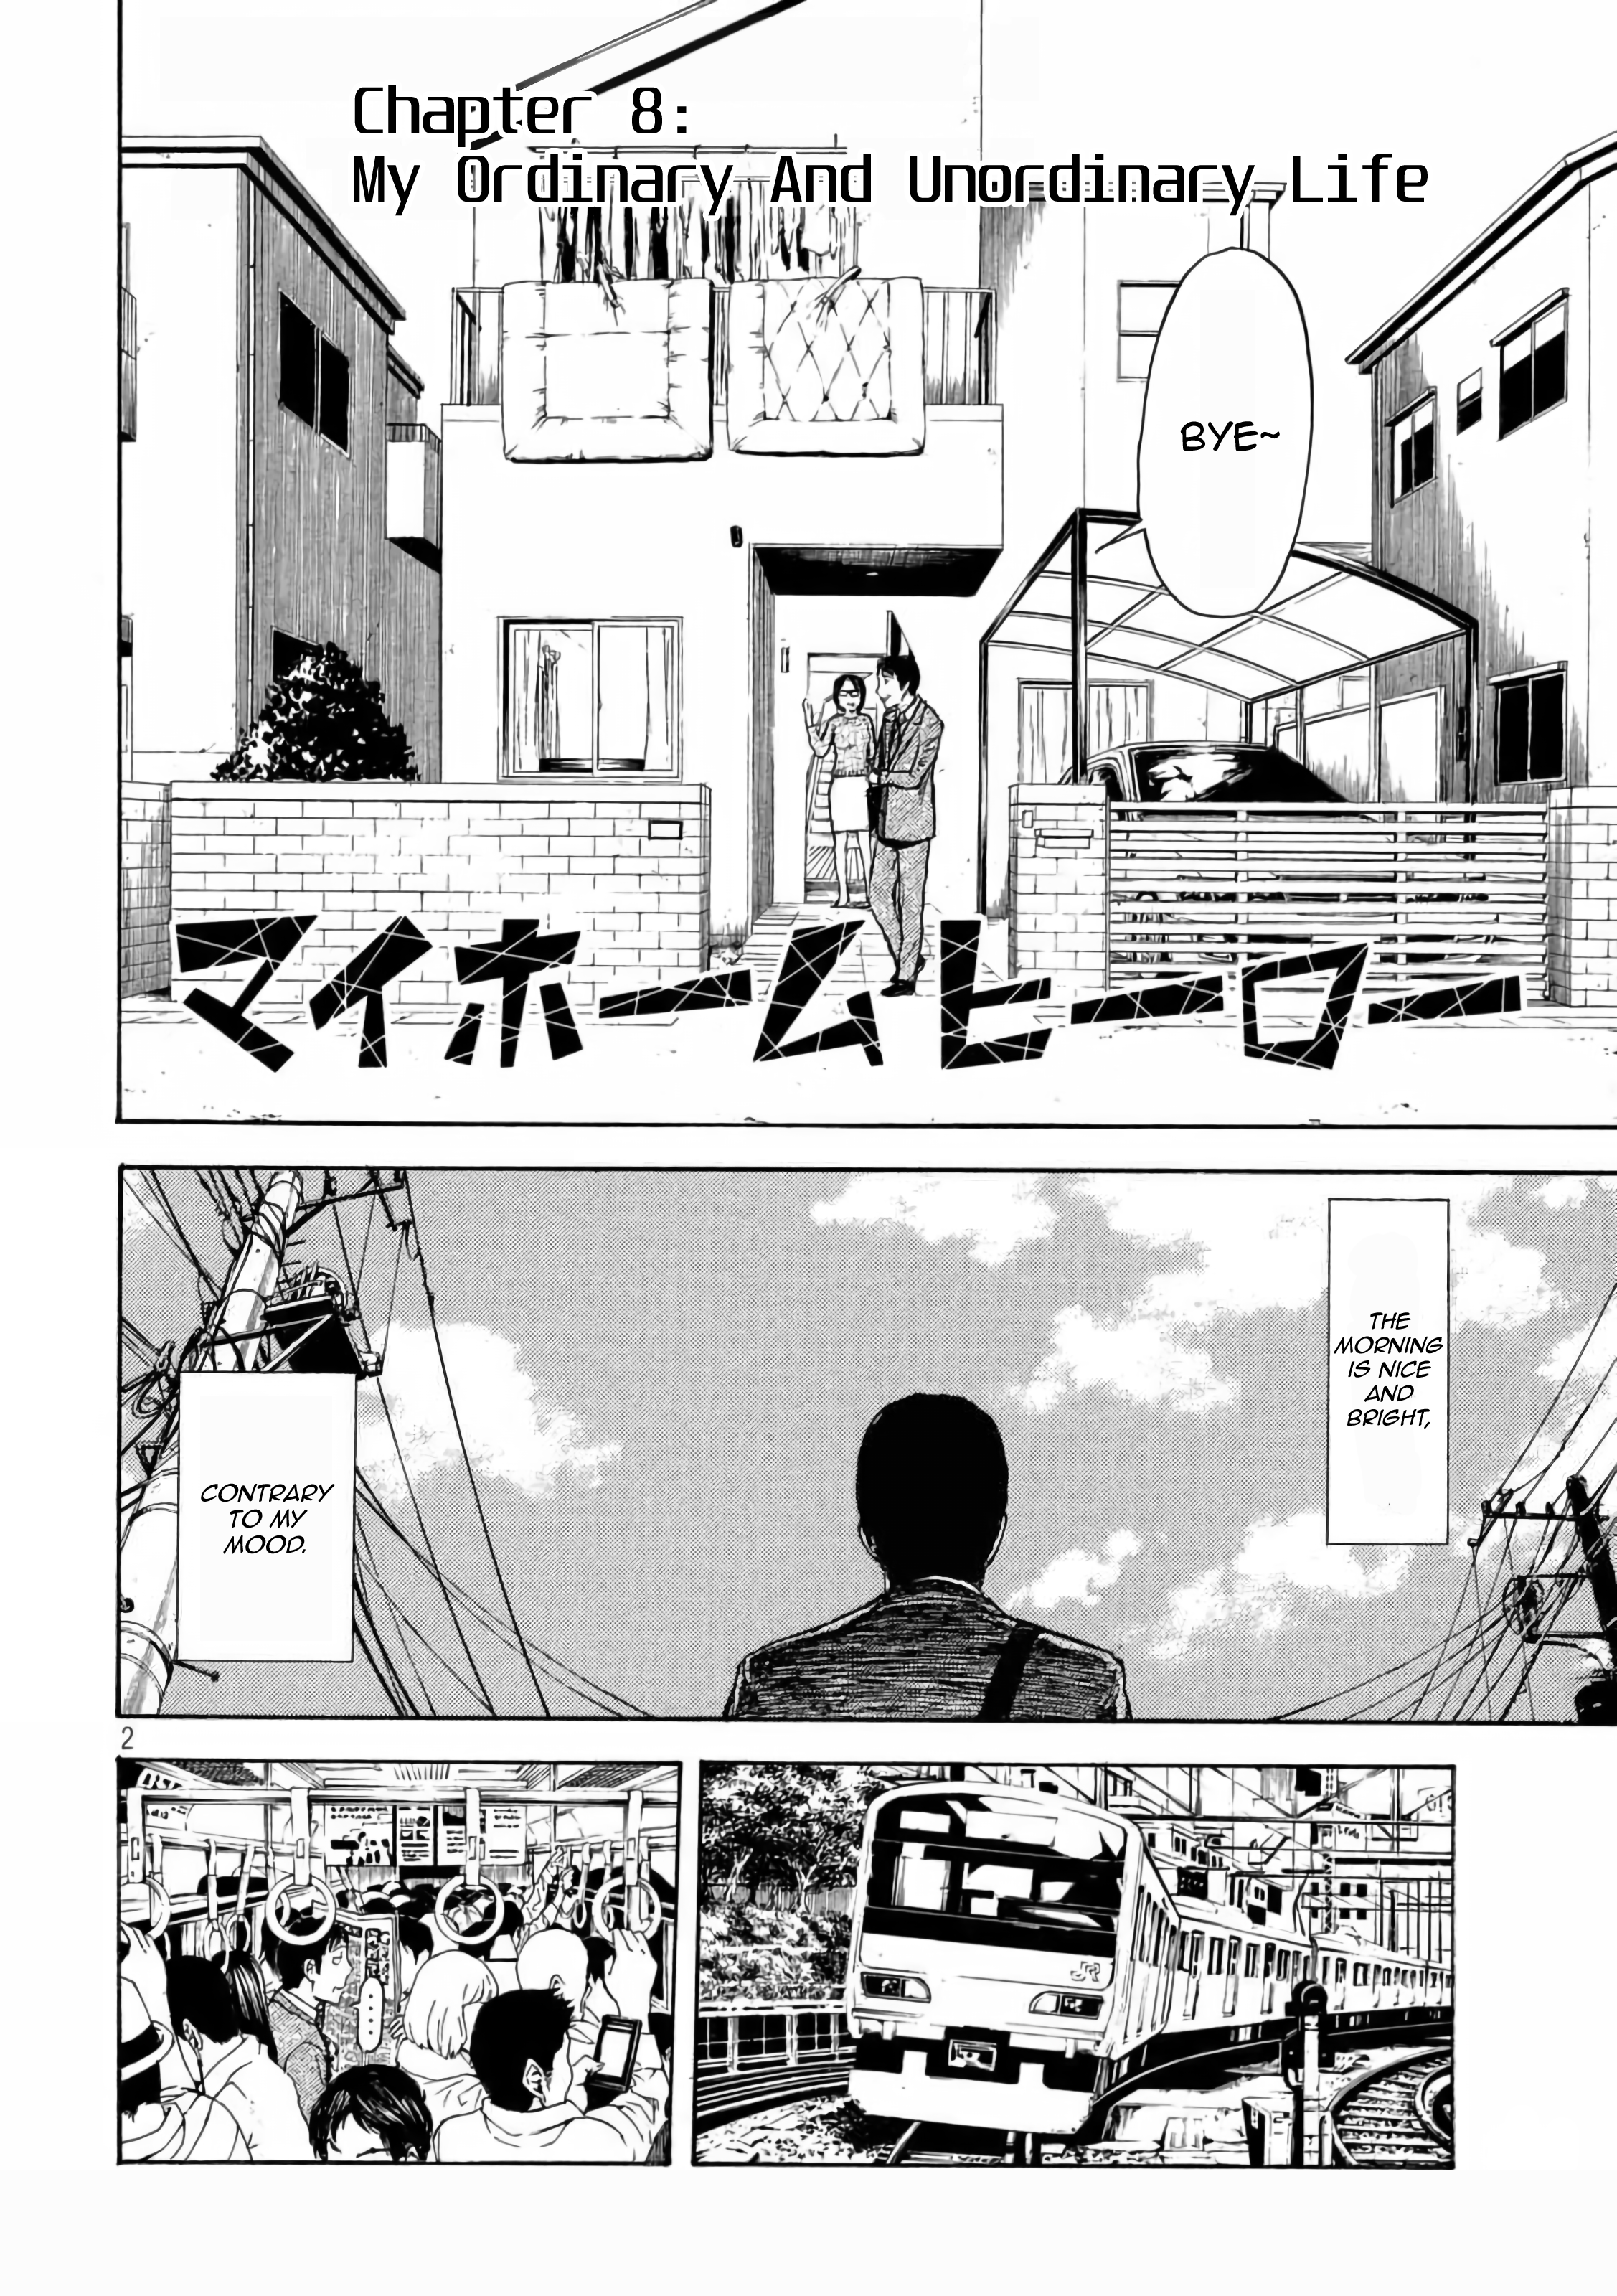 My Home Hero Vol.2 Chapter 8: My Ordinary And Unordinary Life - Picture 3